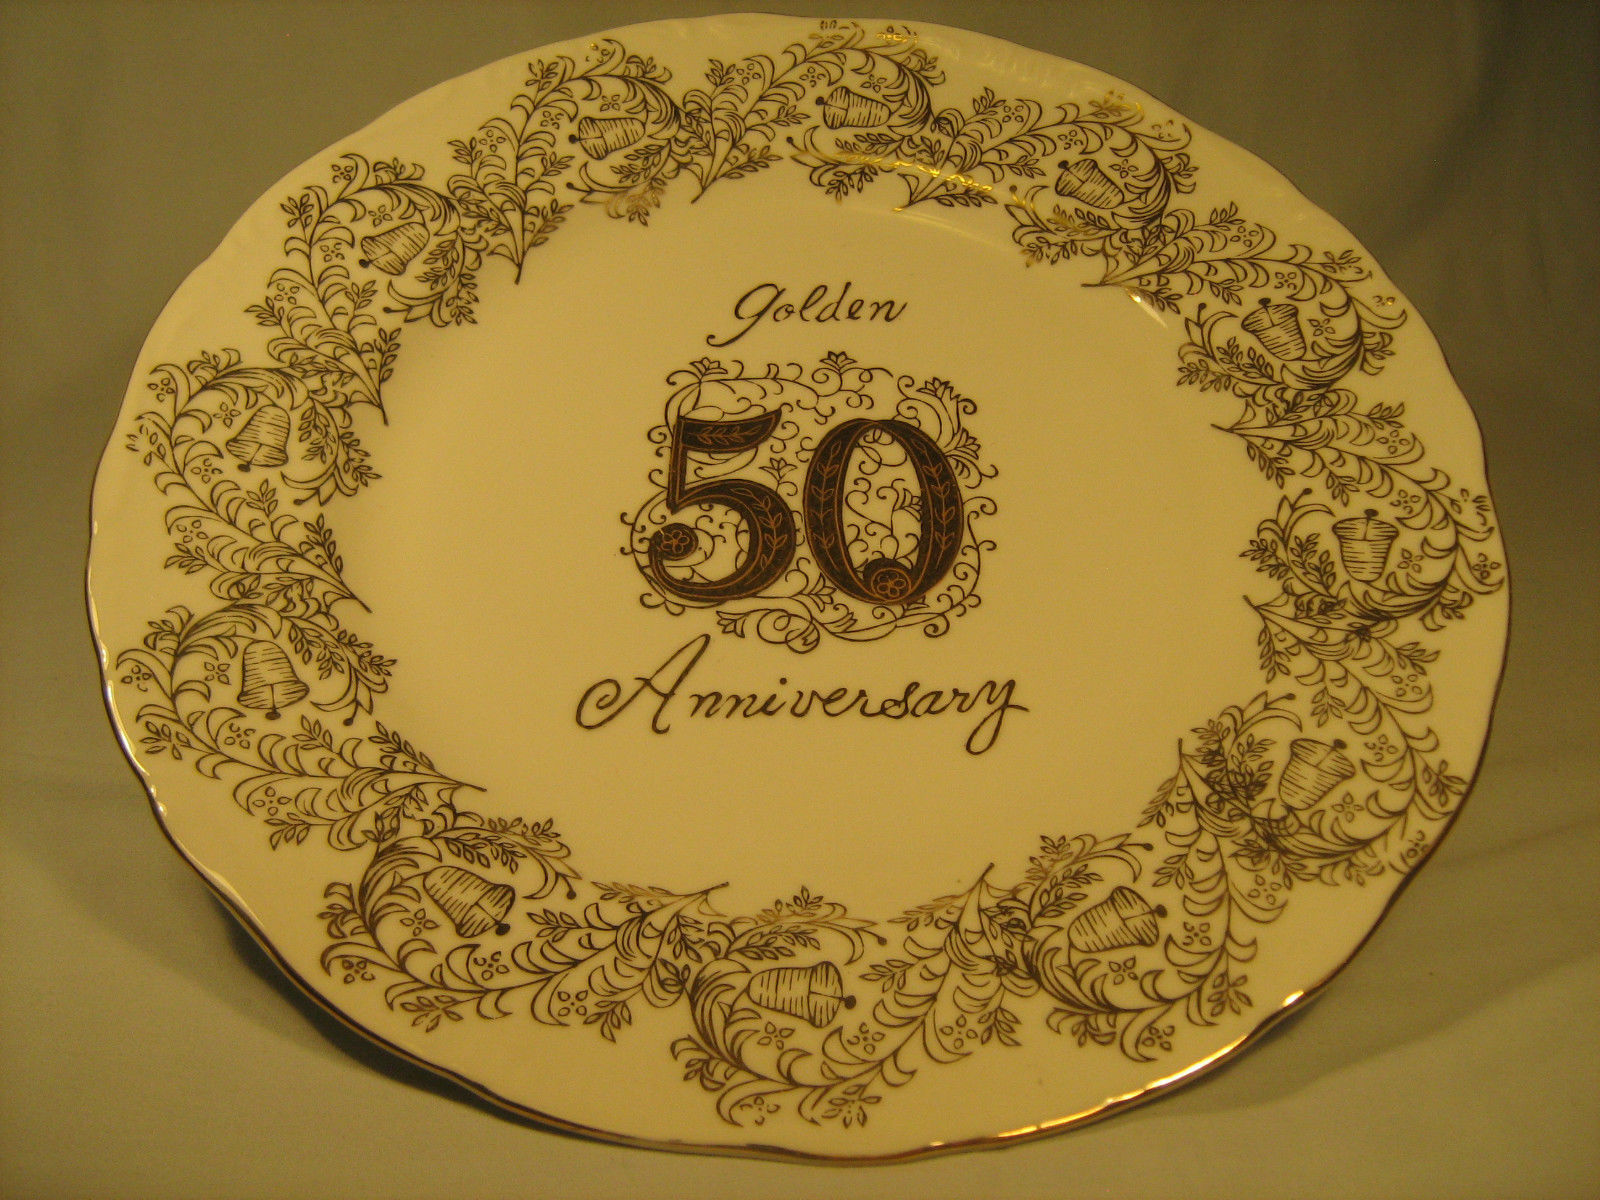 [Y5] 10 1/4" COLLECTOR PLATE GOLDEN 50 ANNIVERSARY Norcrest Fine China - $11.97